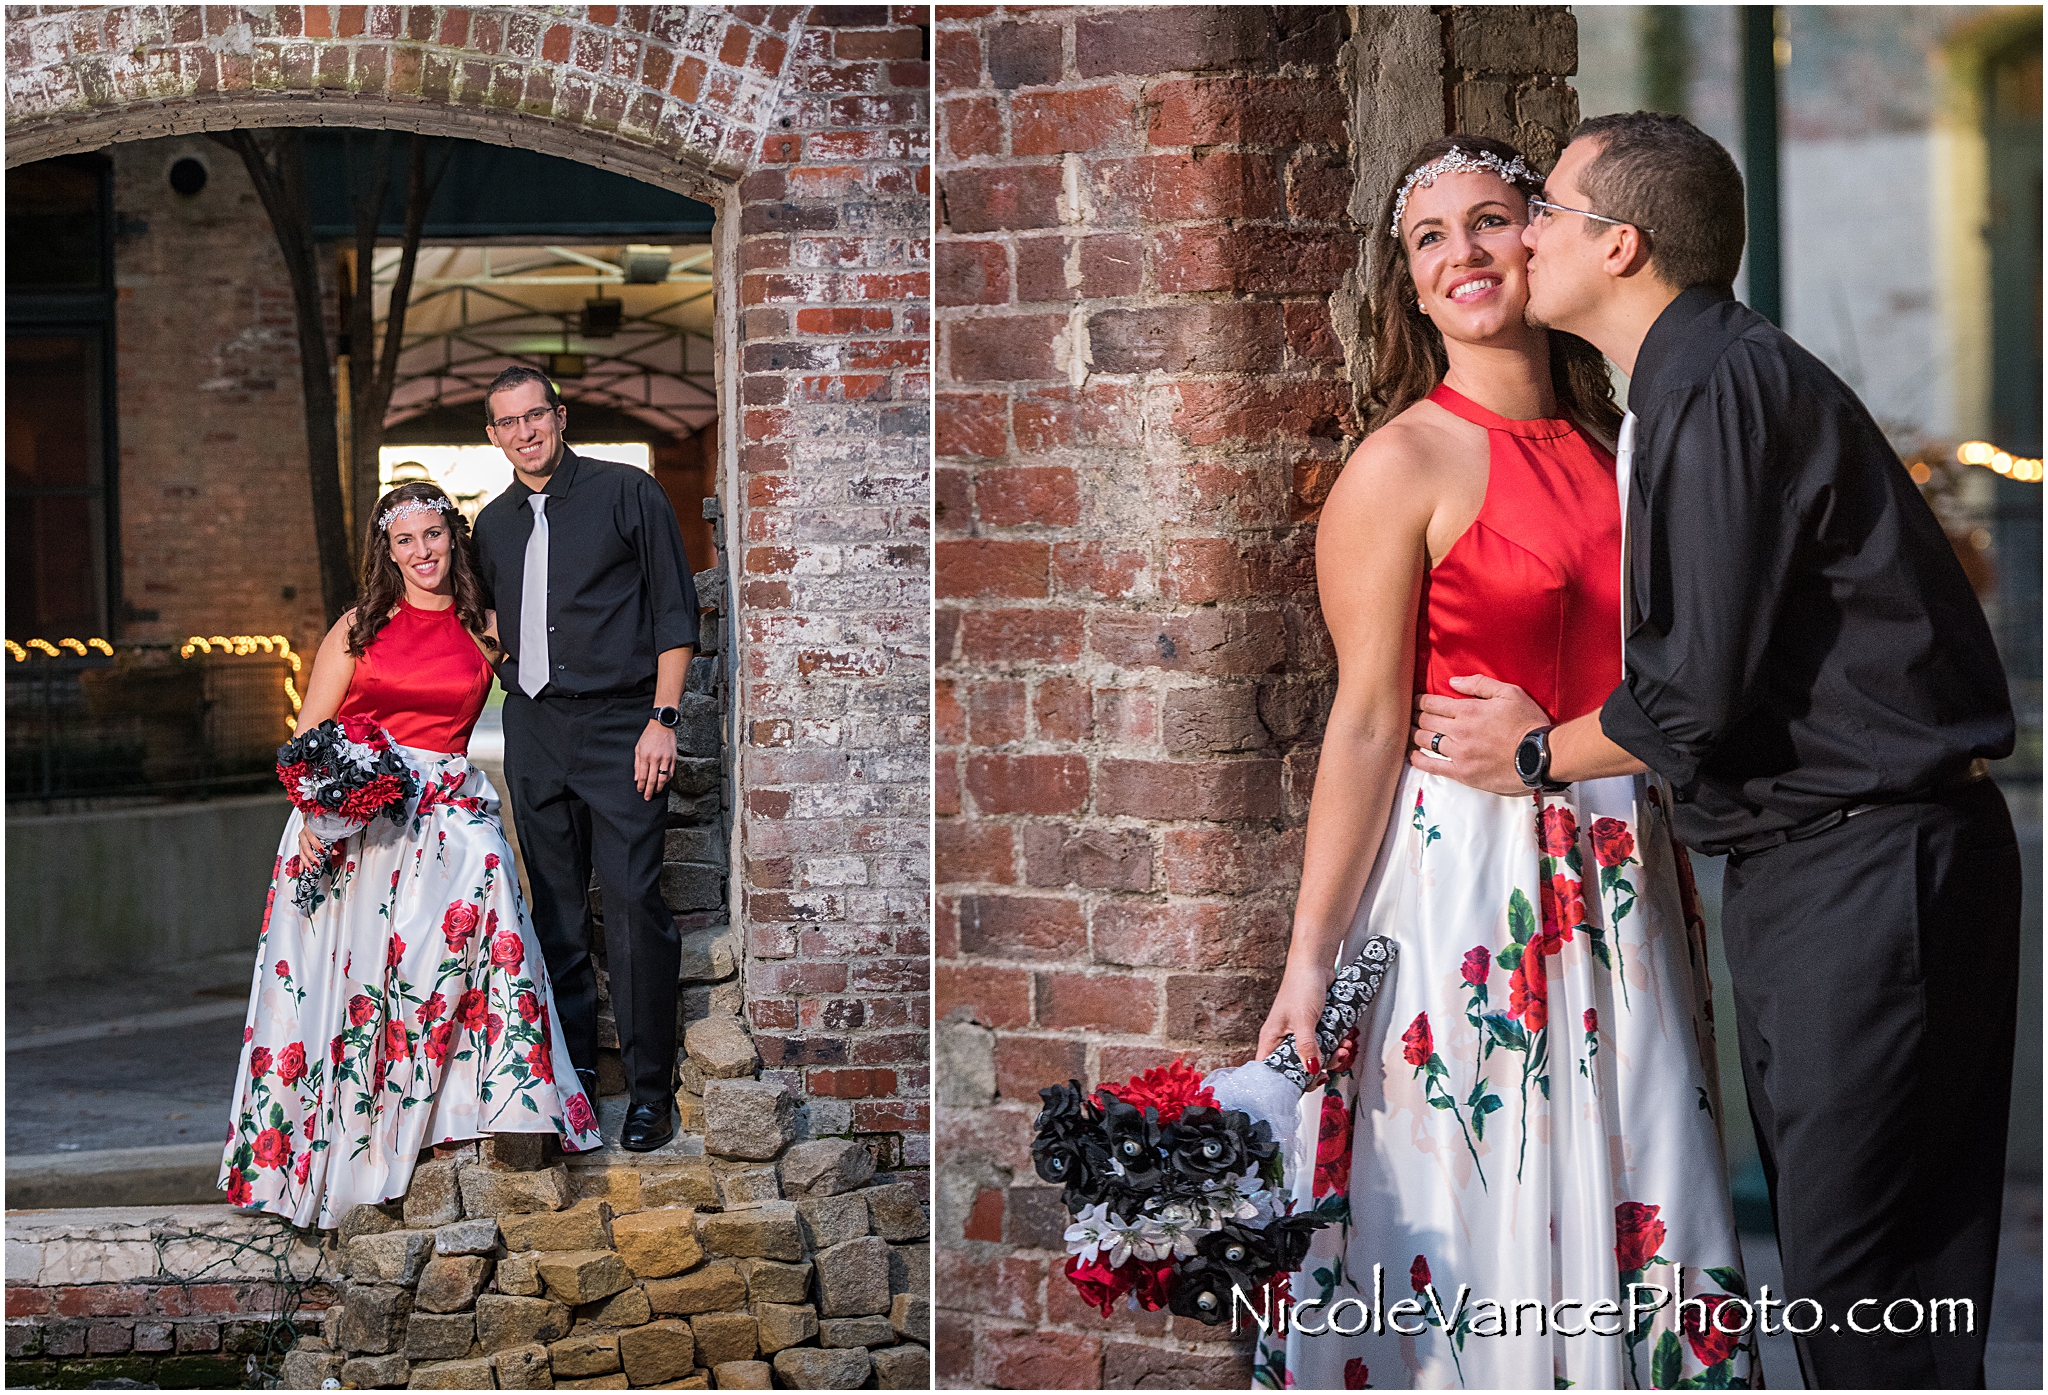 Bride and Groom Portraits at Bookbinders in Richmond, Virginia.